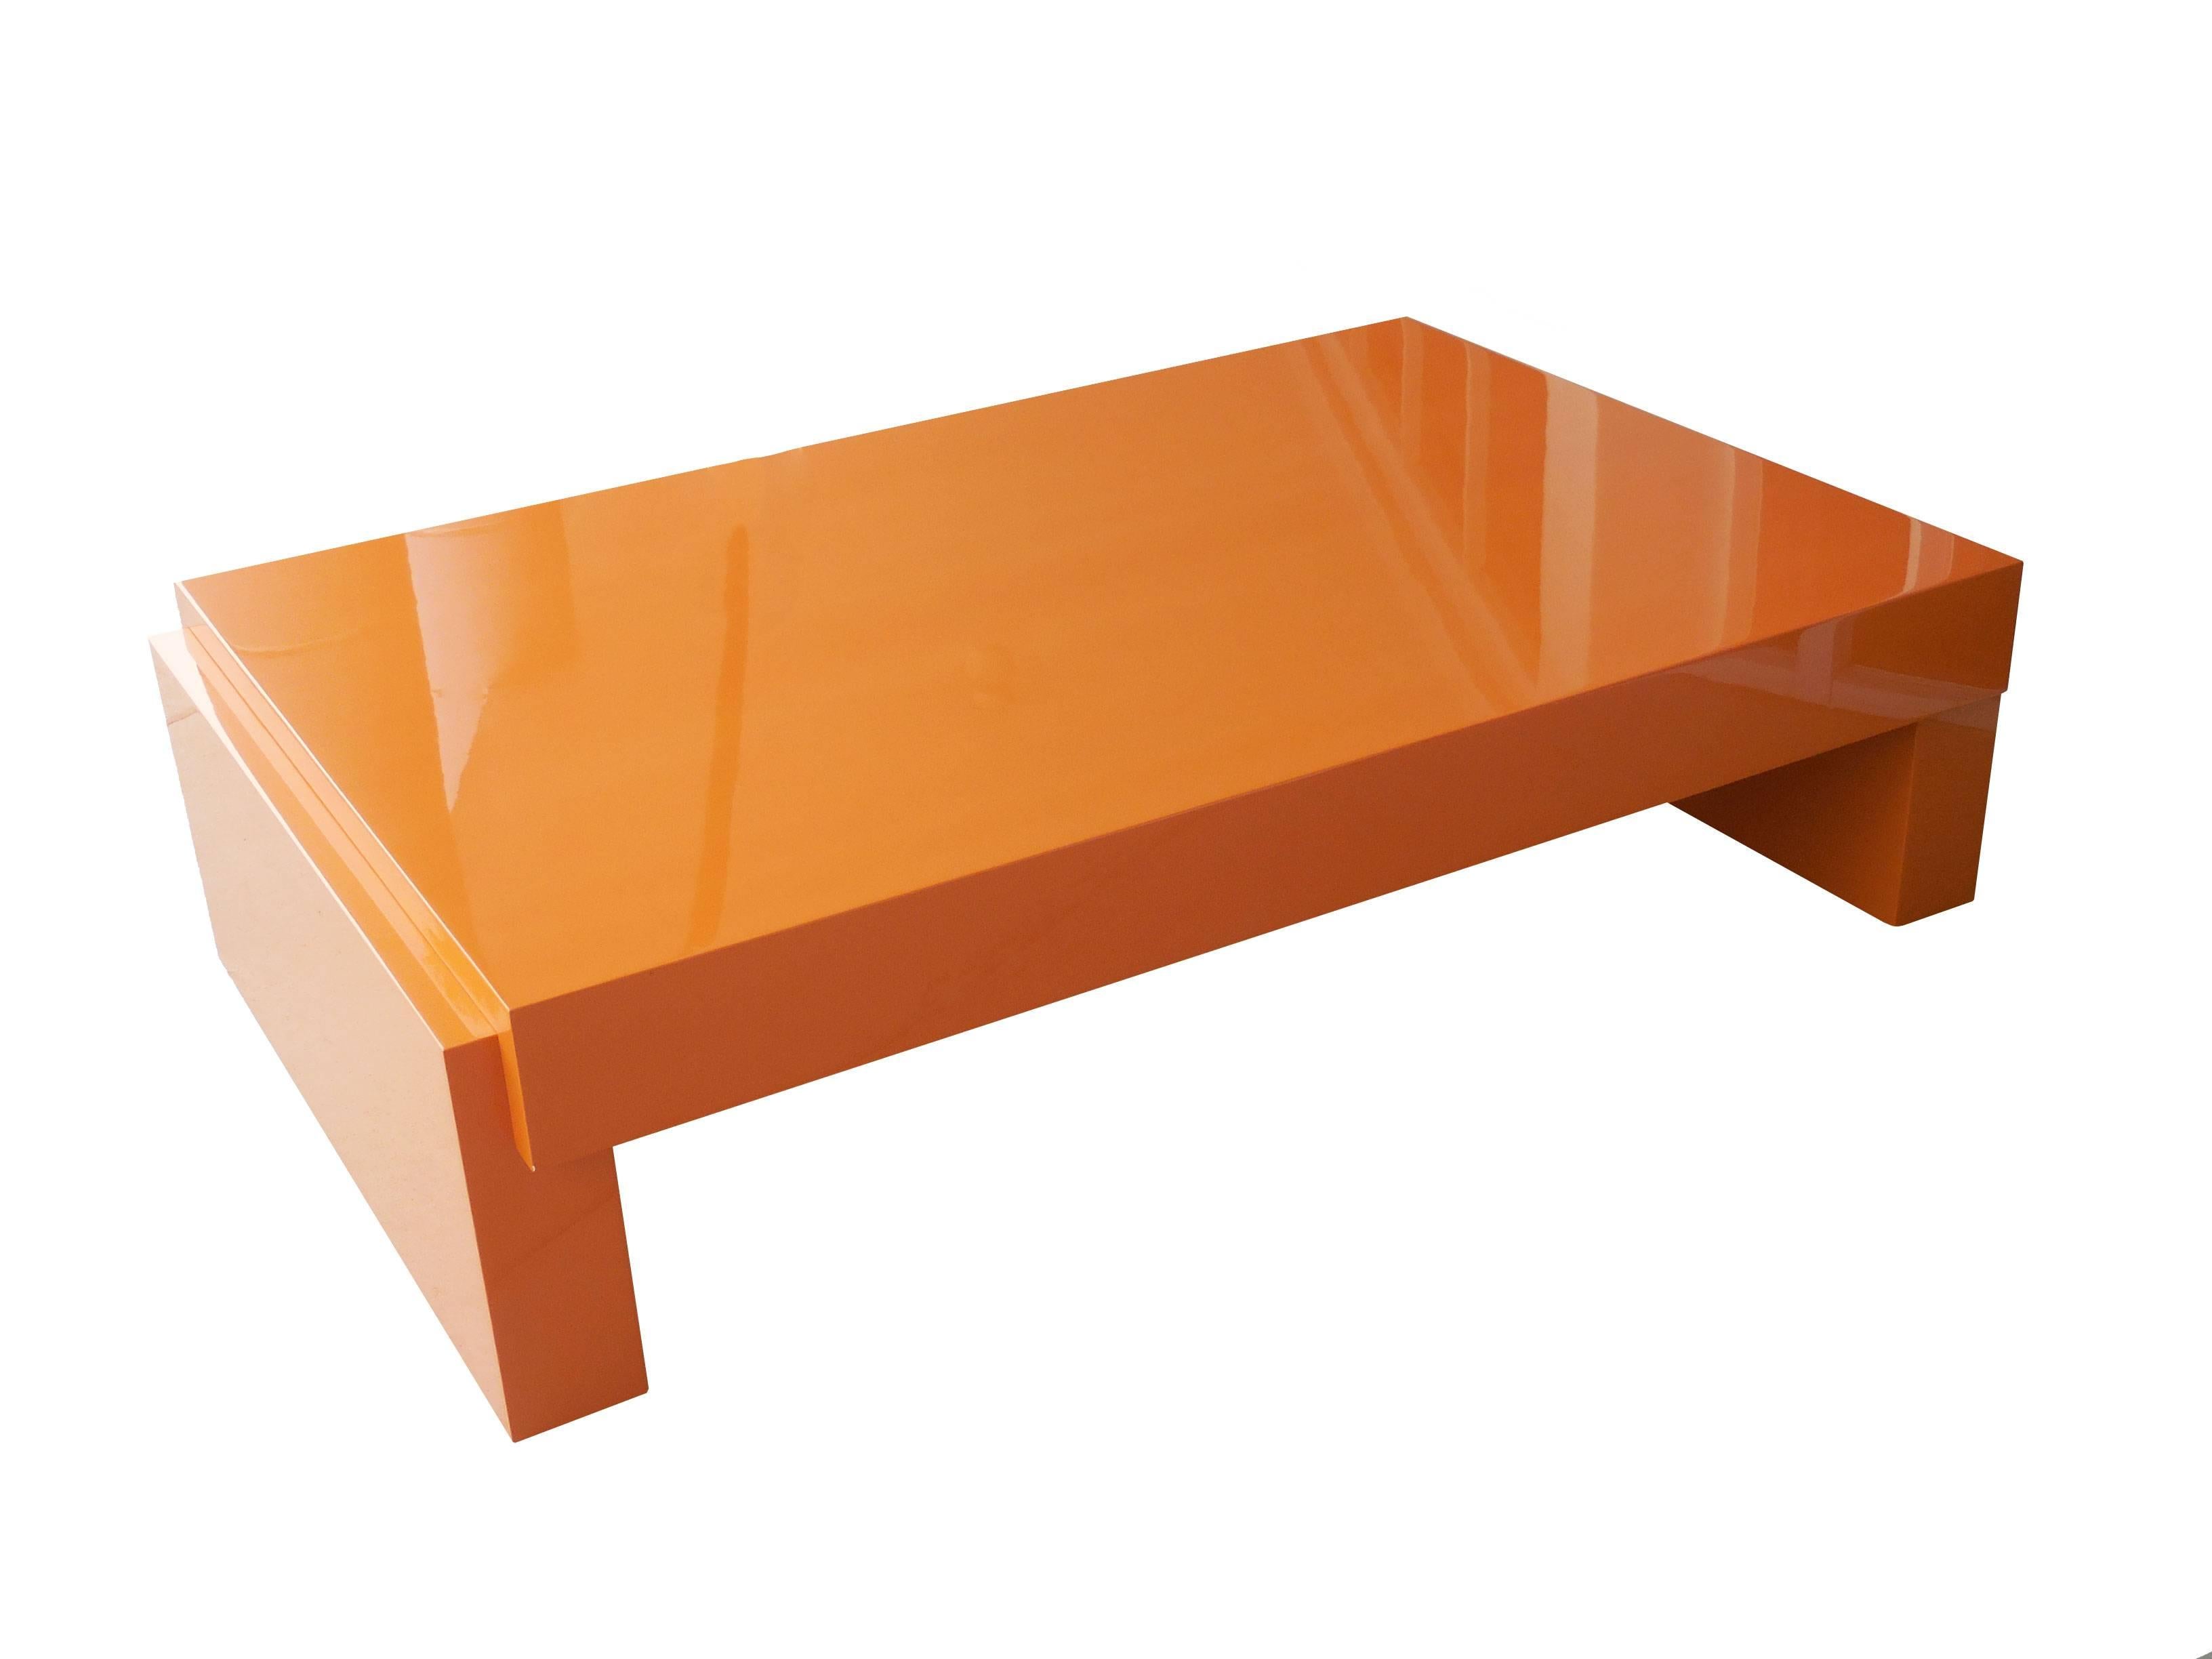 Airport coffee table by Karl Springer. Simple geometric design with great proportions. New perfect high gloss lacquer finish.